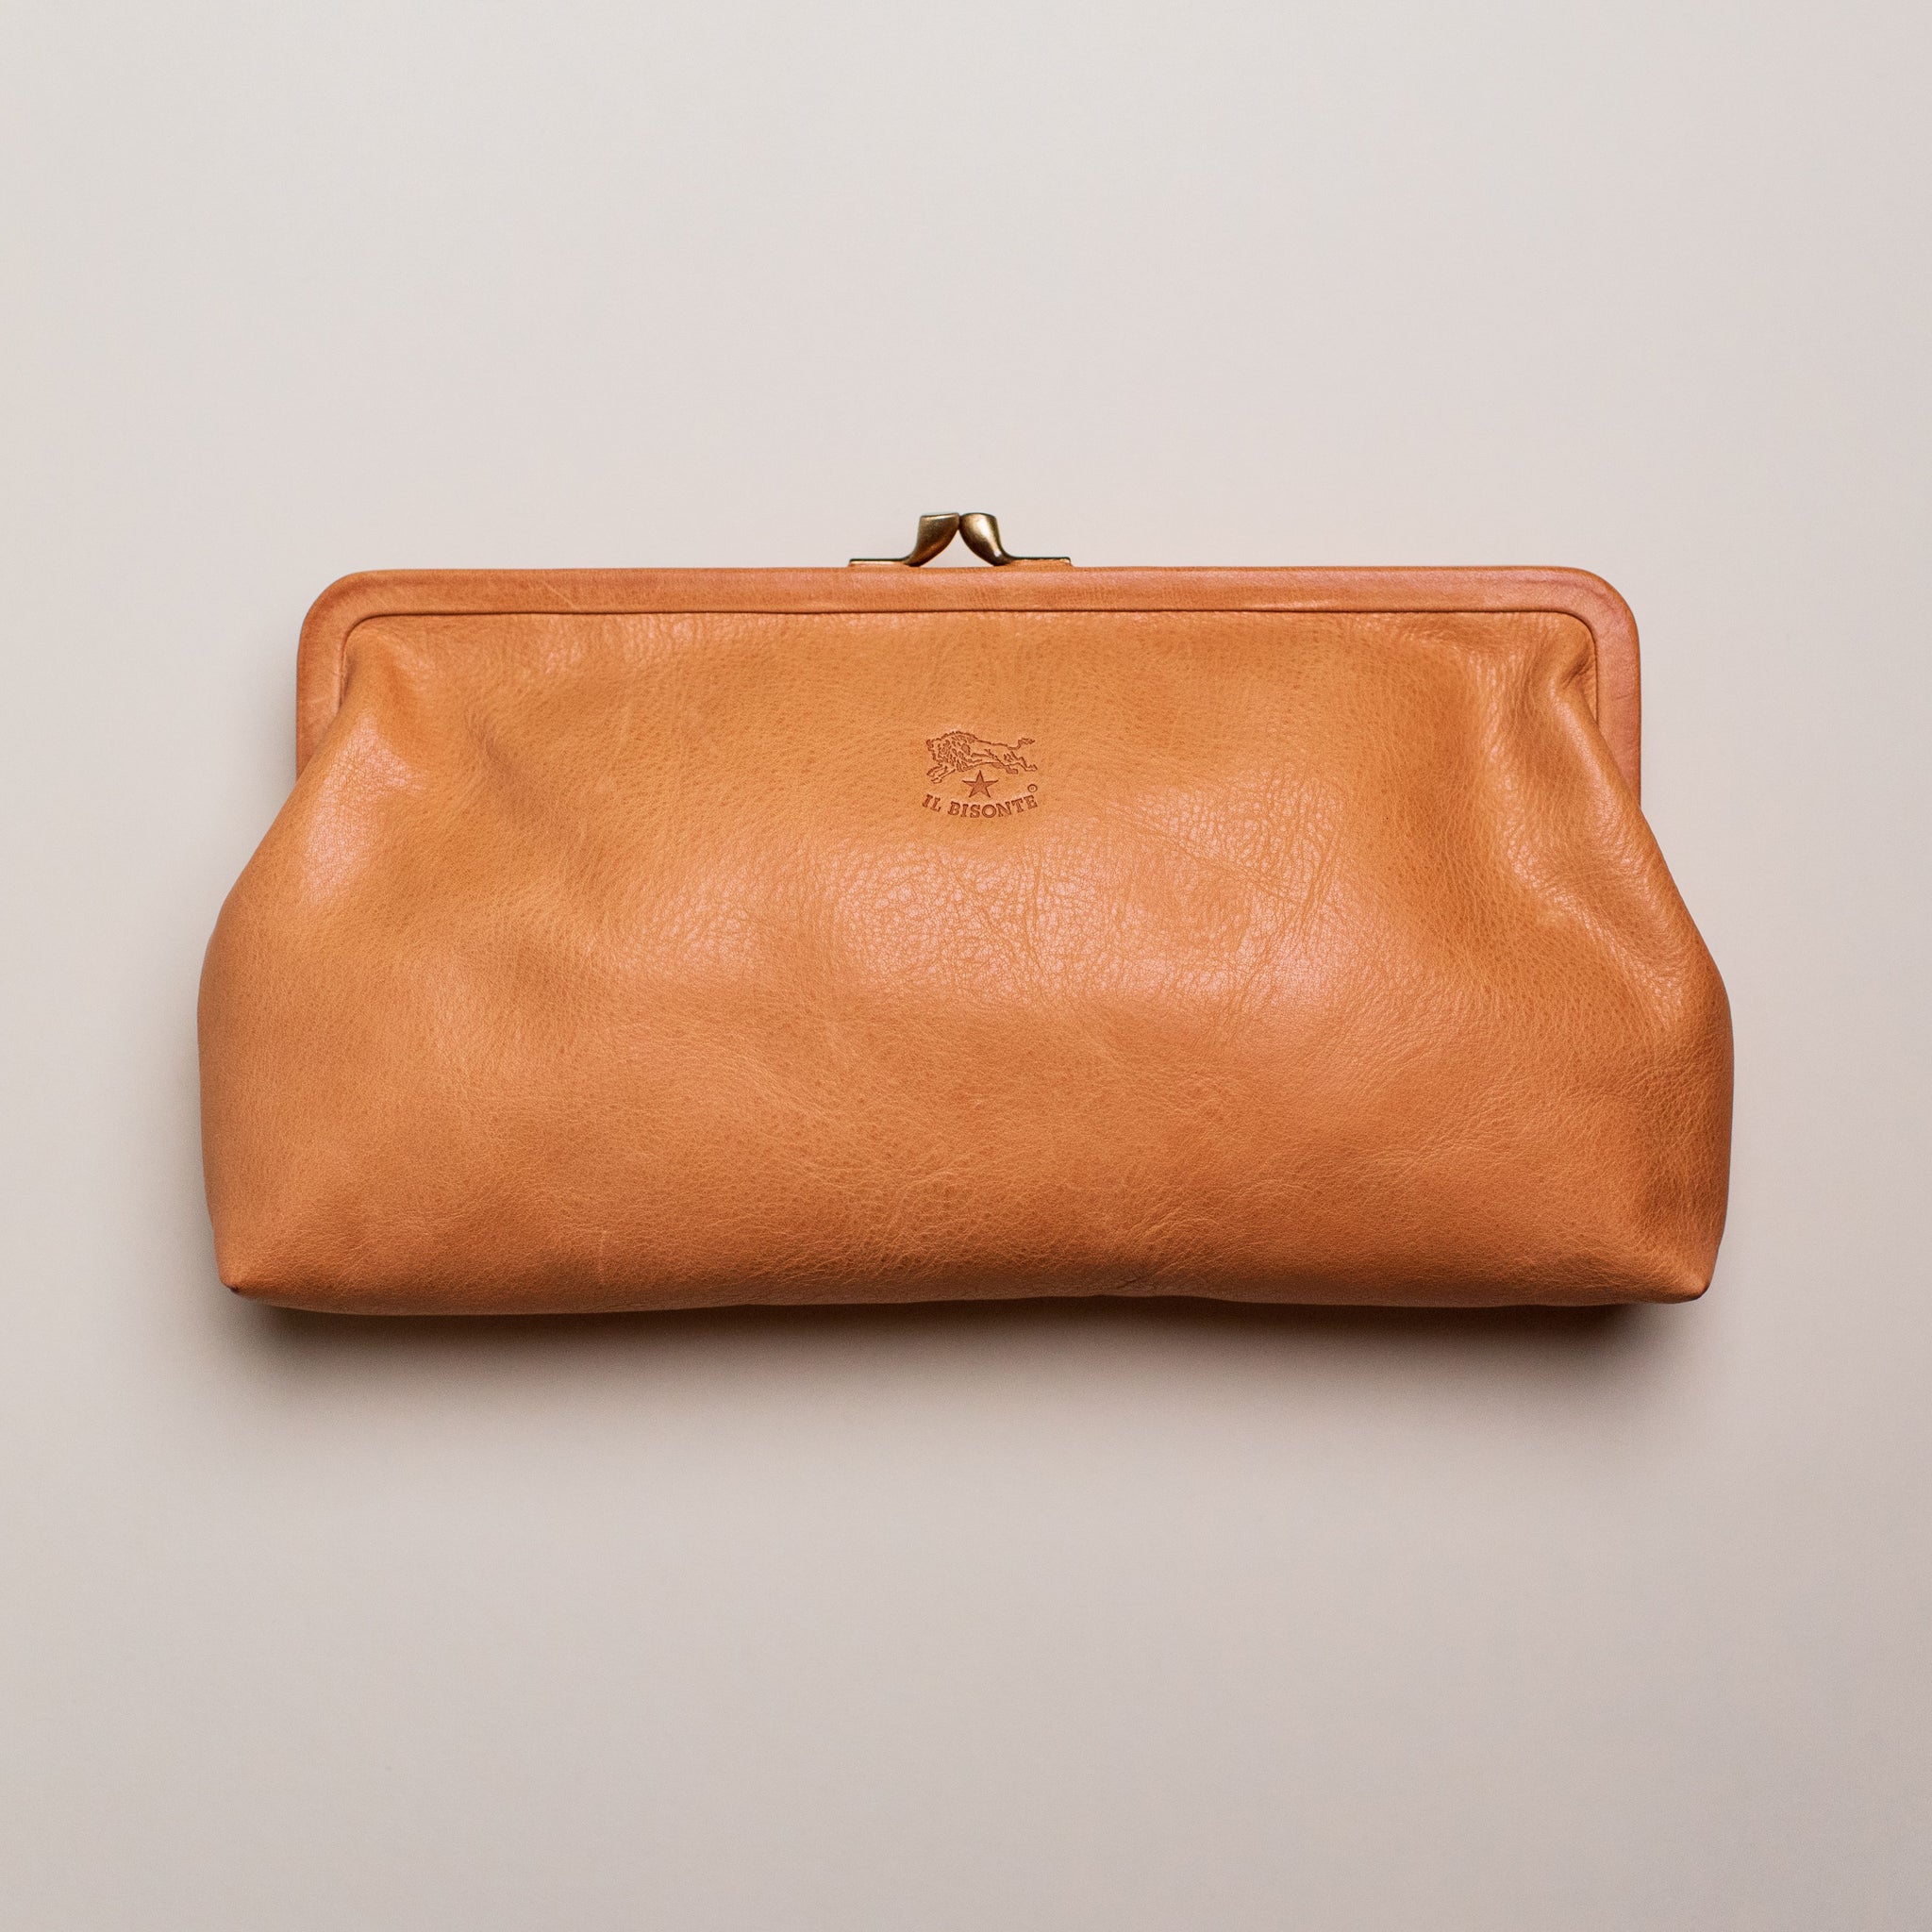 Giulia  Women's clutch bag in leather color caramel – Il Bisonte